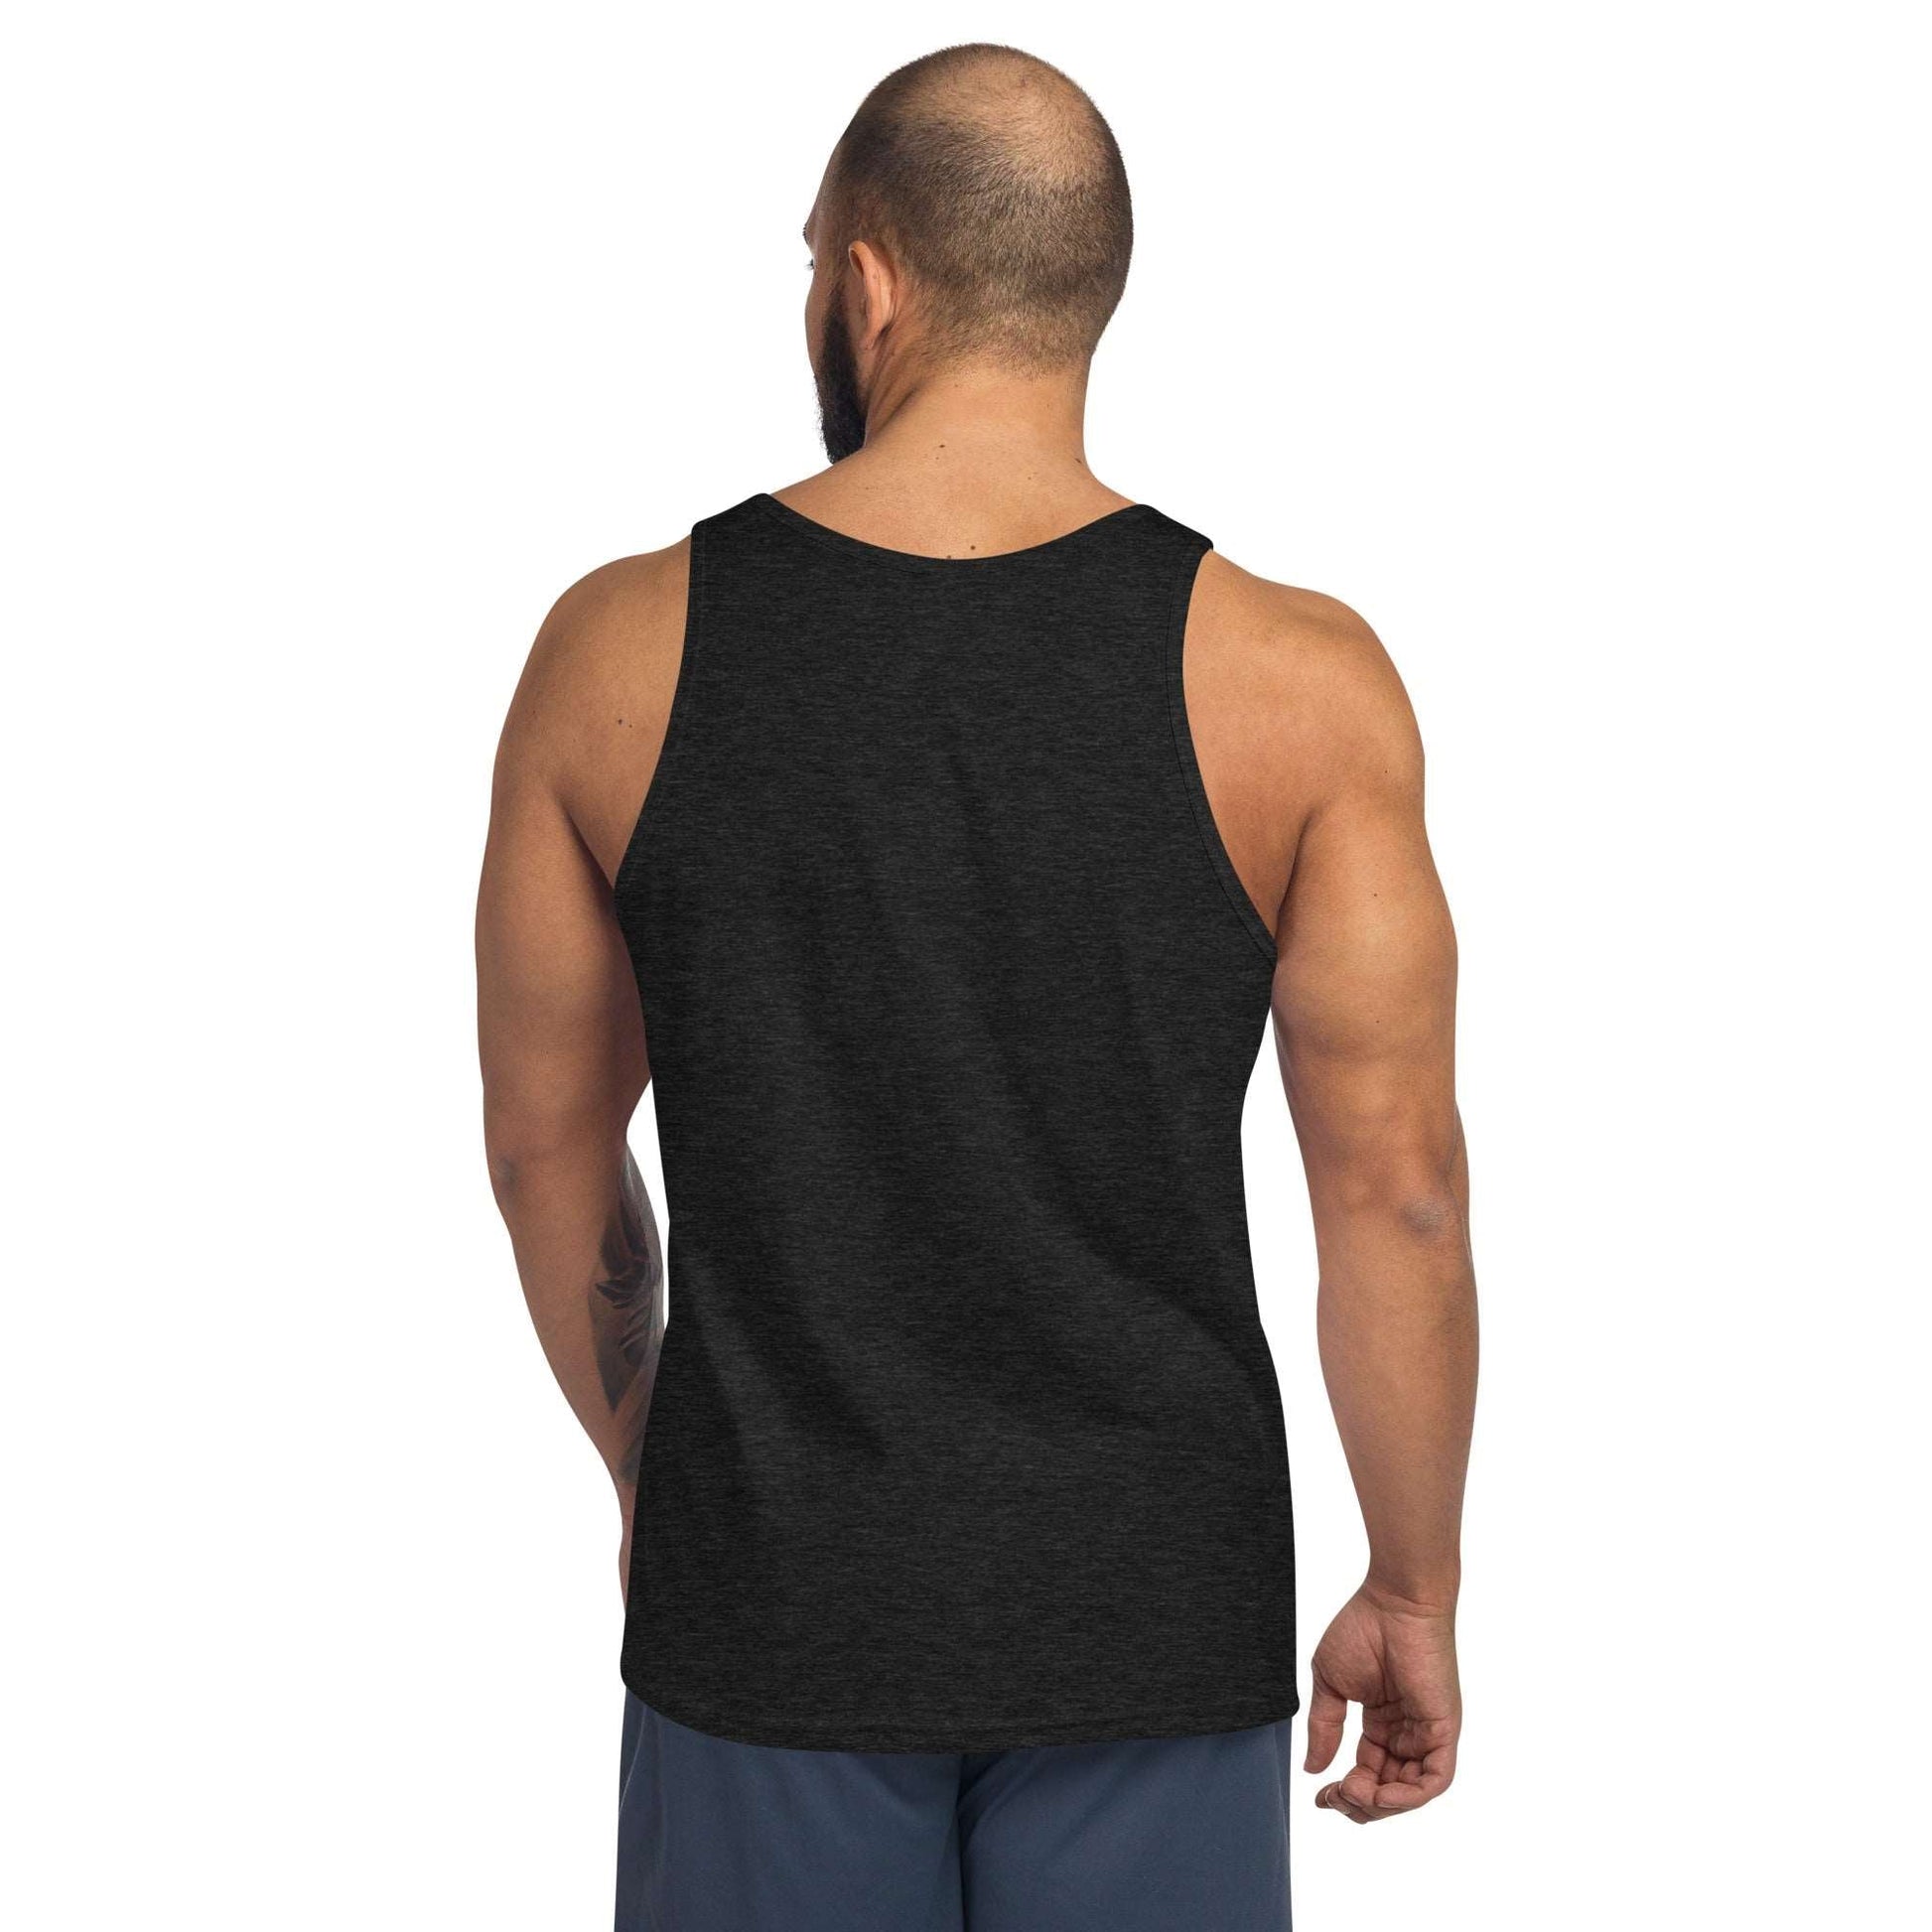 DnD Dungeon Master Tank Top - Beware the Smiling DM Tank Top